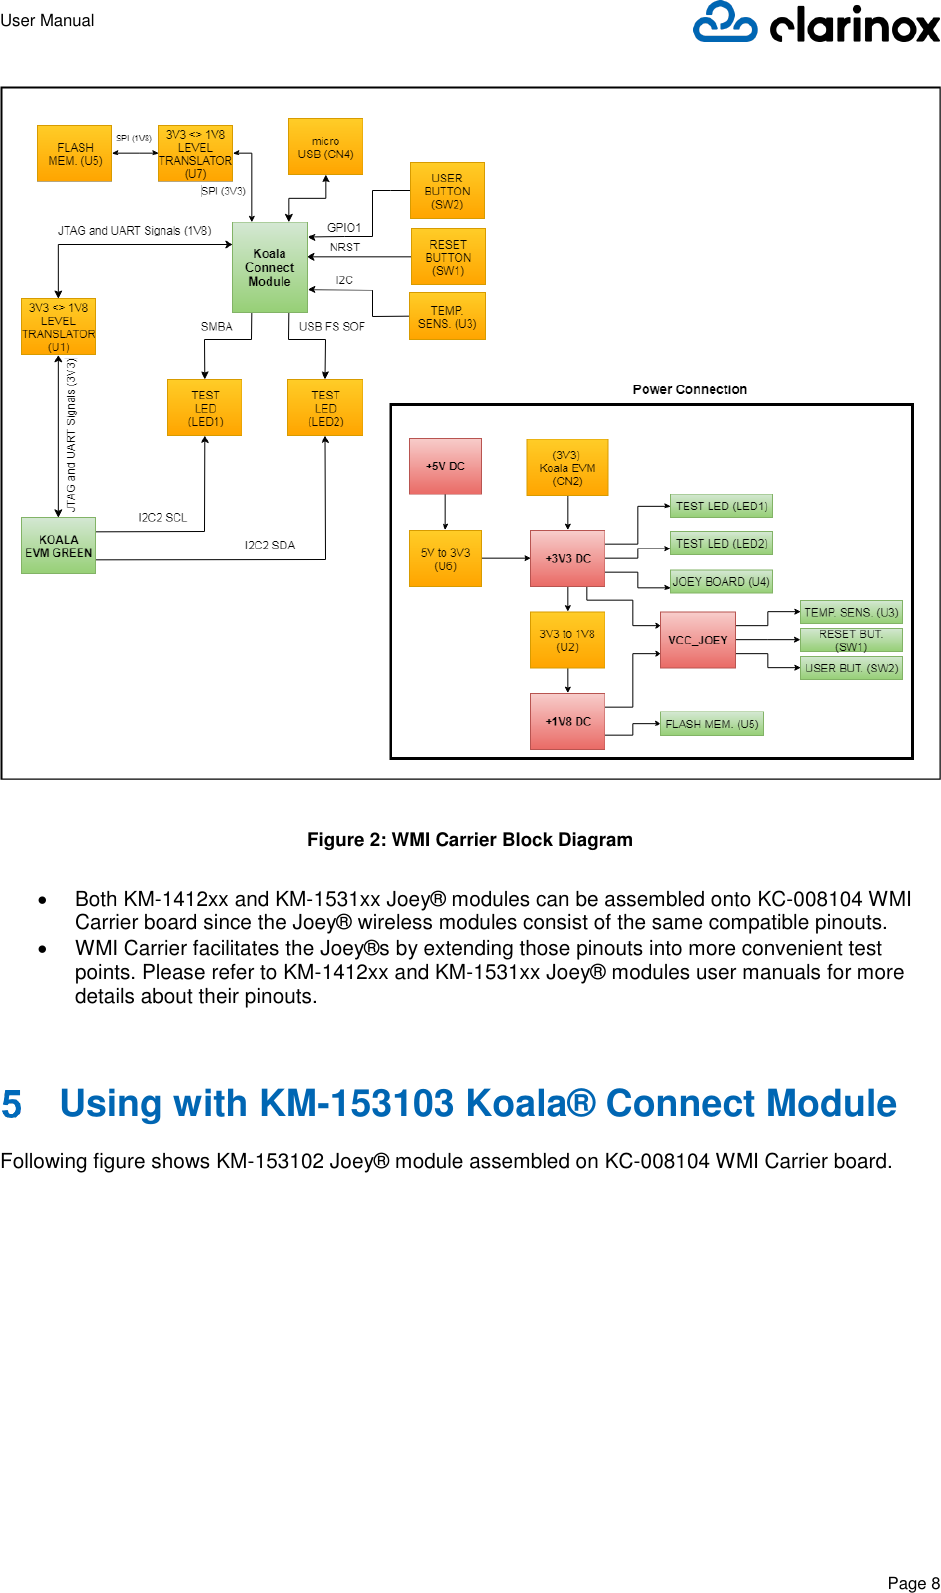 User Manual      Page 8    Figure 2: WMI Carrier Block Diagram  •  Both KM-1412xx and KM-1531xx Joey® modules can be assembled onto KC-008104 WMI Carrier board since the Joey® wireless modules consist of the same compatible pinouts. •  WMI Carrier facilitates the Joey®s by extending those pinouts into more convenient test points. Please refer to KM-1412xx and KM-1531xx Joey® modules user manuals for more details about their pinouts.    Using with KM-153103 Koala® Connect Module  Following figure shows KM-153102 Joey® module assembled on KC-008104 WMI Carrier board.                